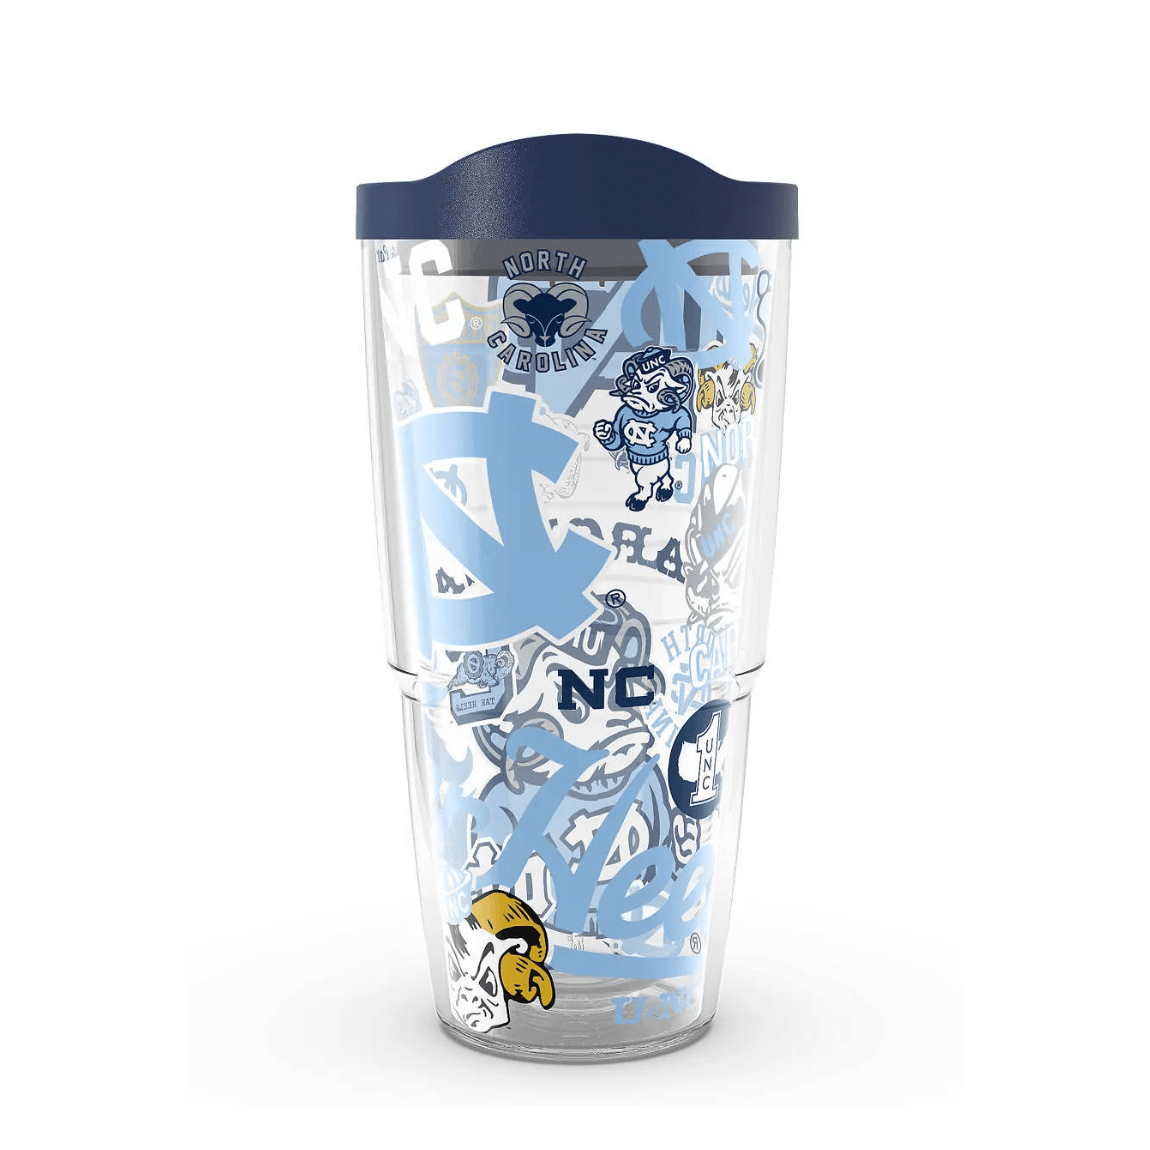 https://cdn.shopify.com/s/files/1/0472/3146/7683/products/tervis-tumbler-24-oz-north-carolina-tar-heels-all-over-tumbler-with-navy-lid-35357120626851_1600x.png?v=1660310558